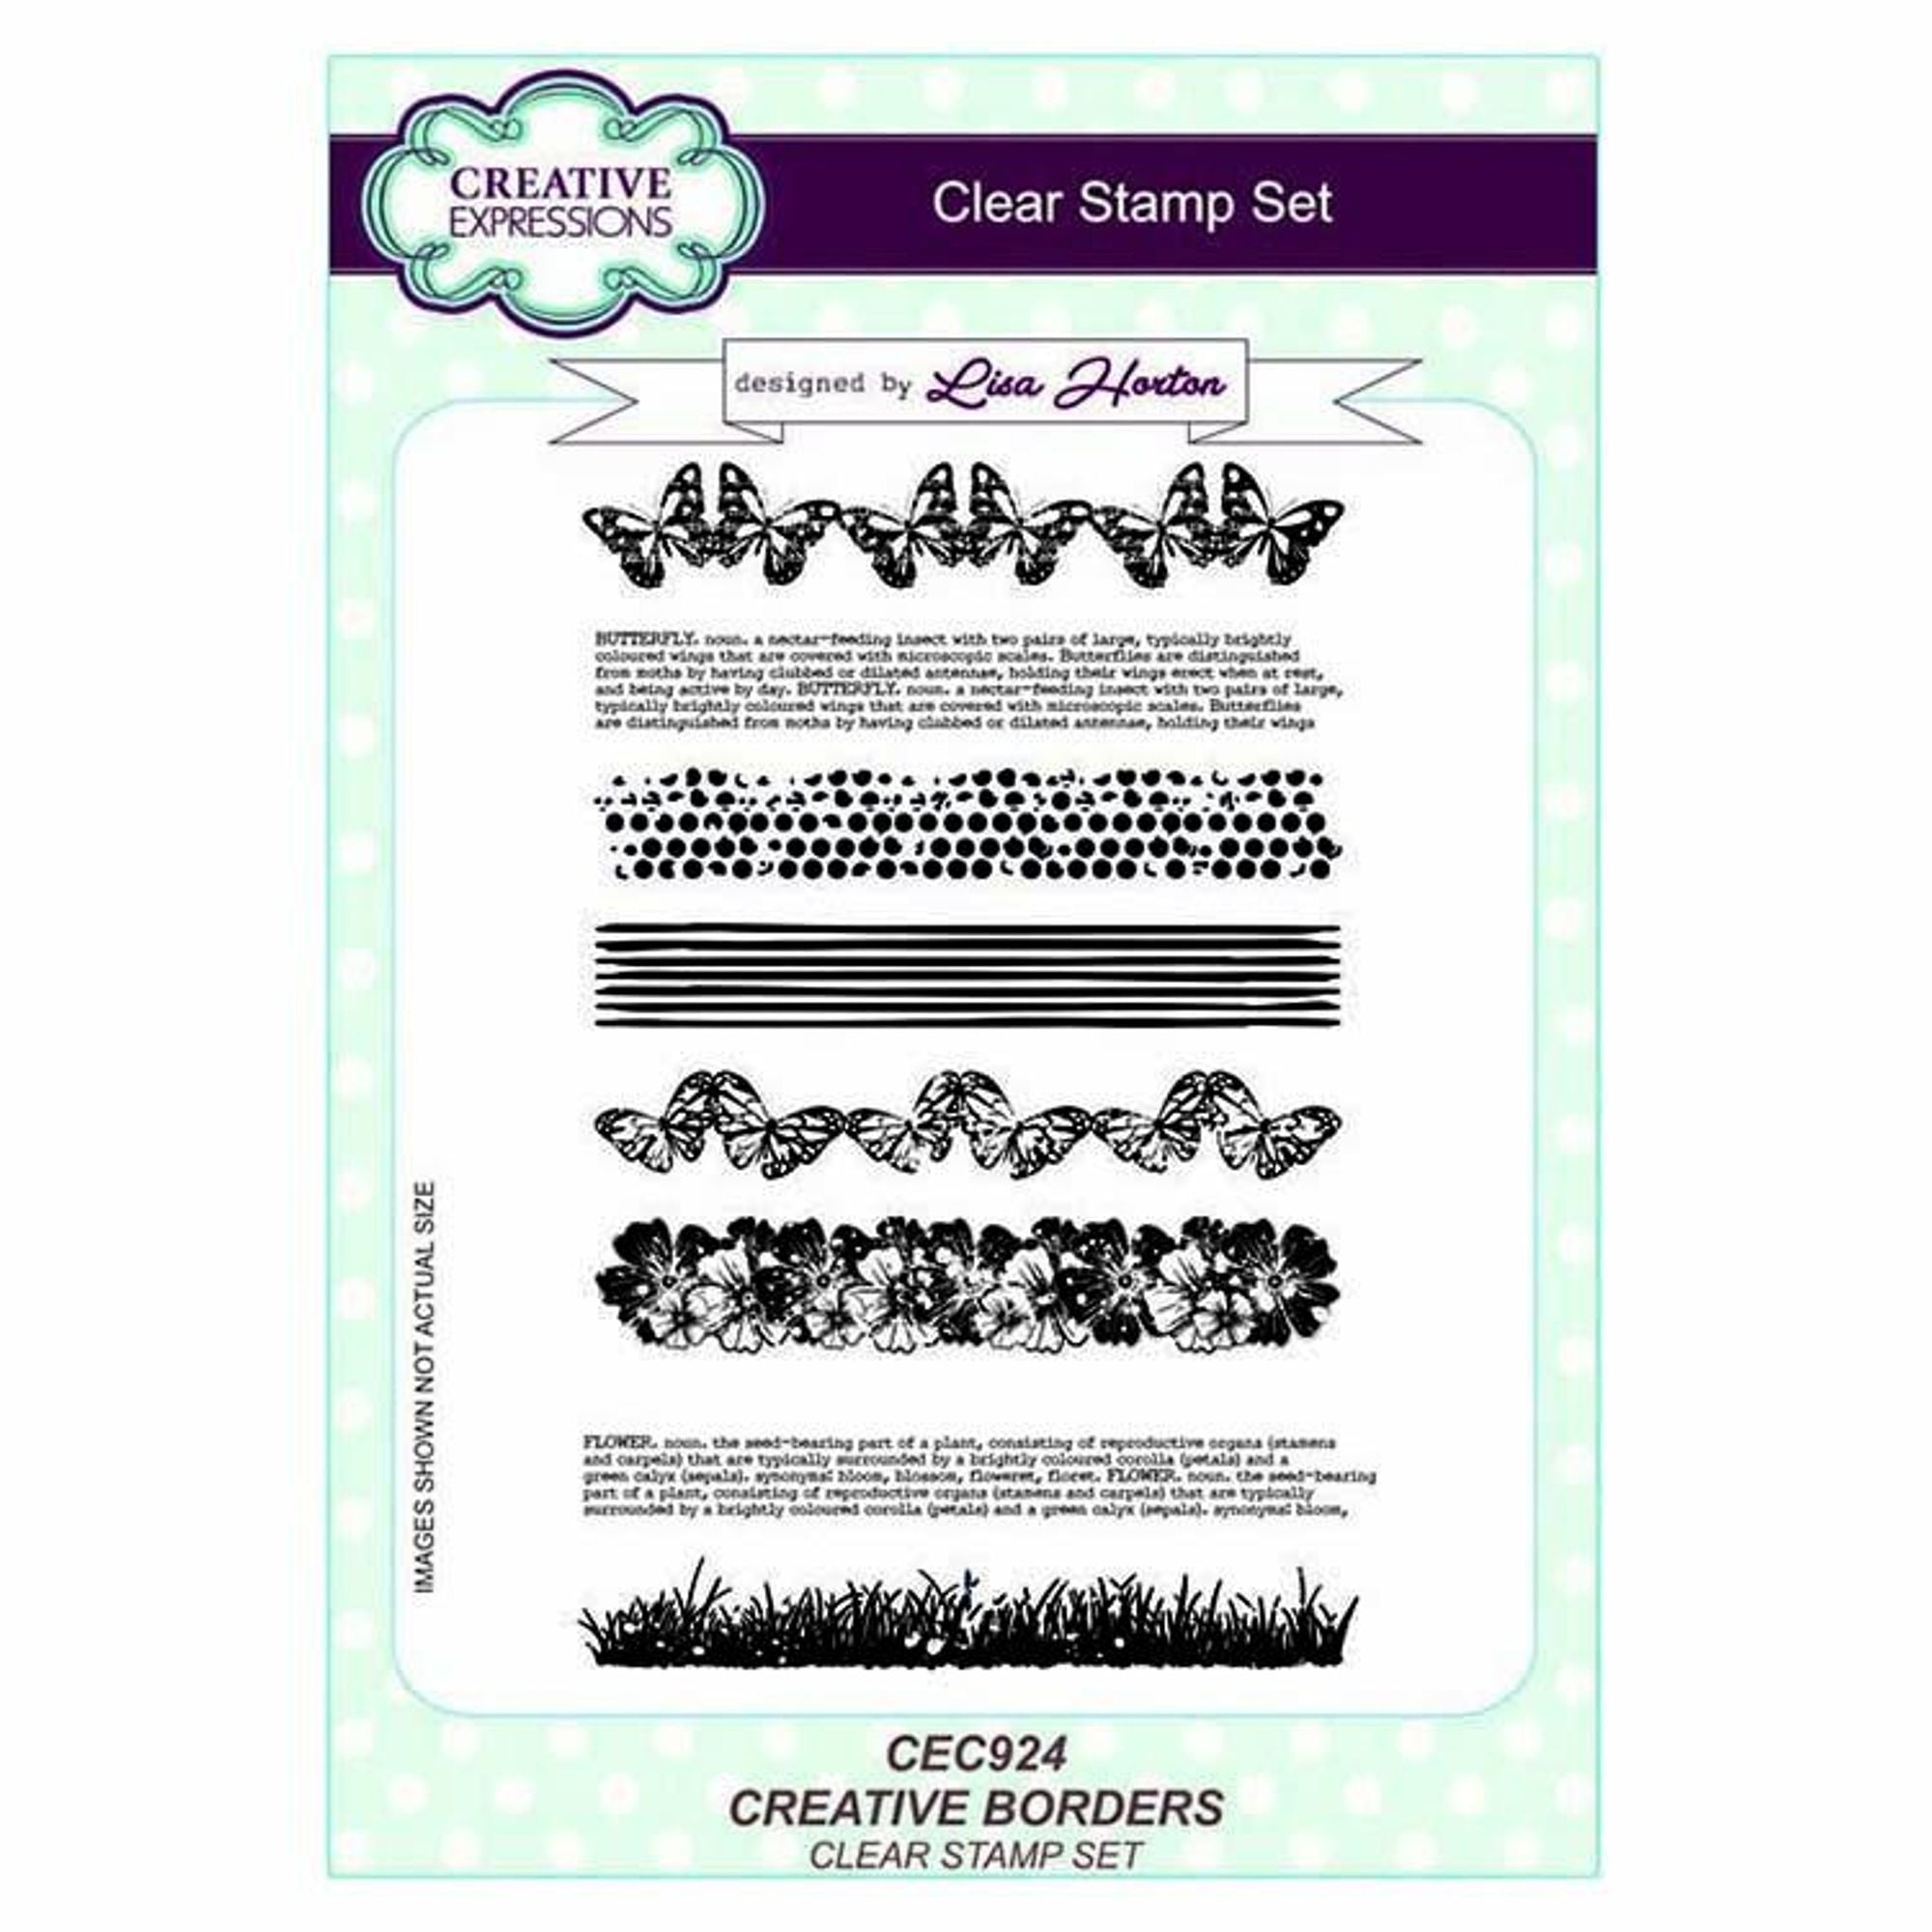 Creative Expressions Creative Borders A5 Clear Stamp Set